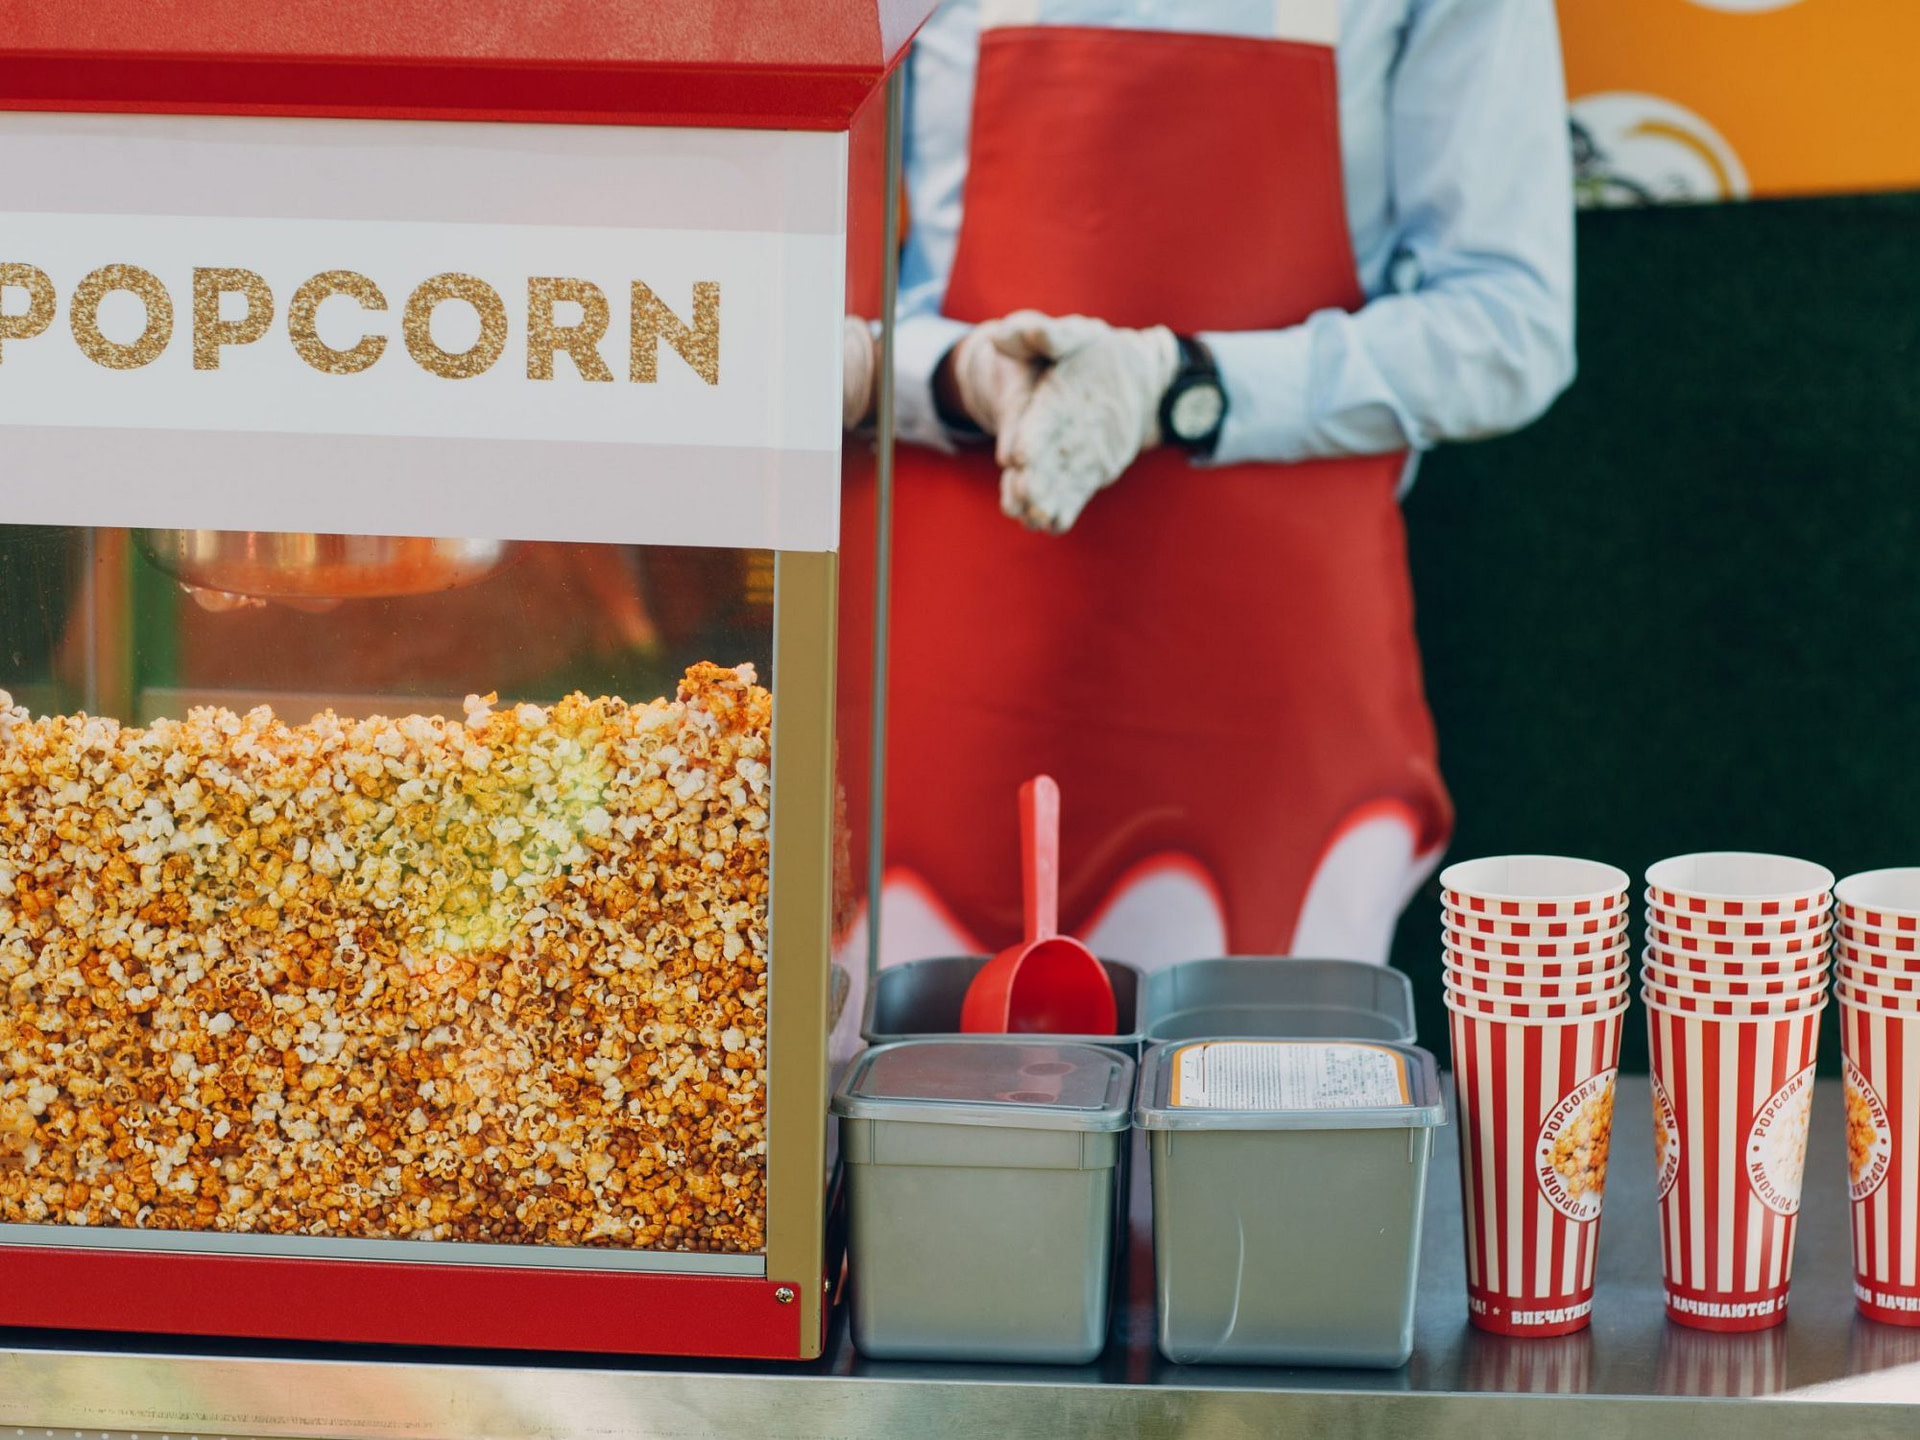 Seller and tray cart with popcorn